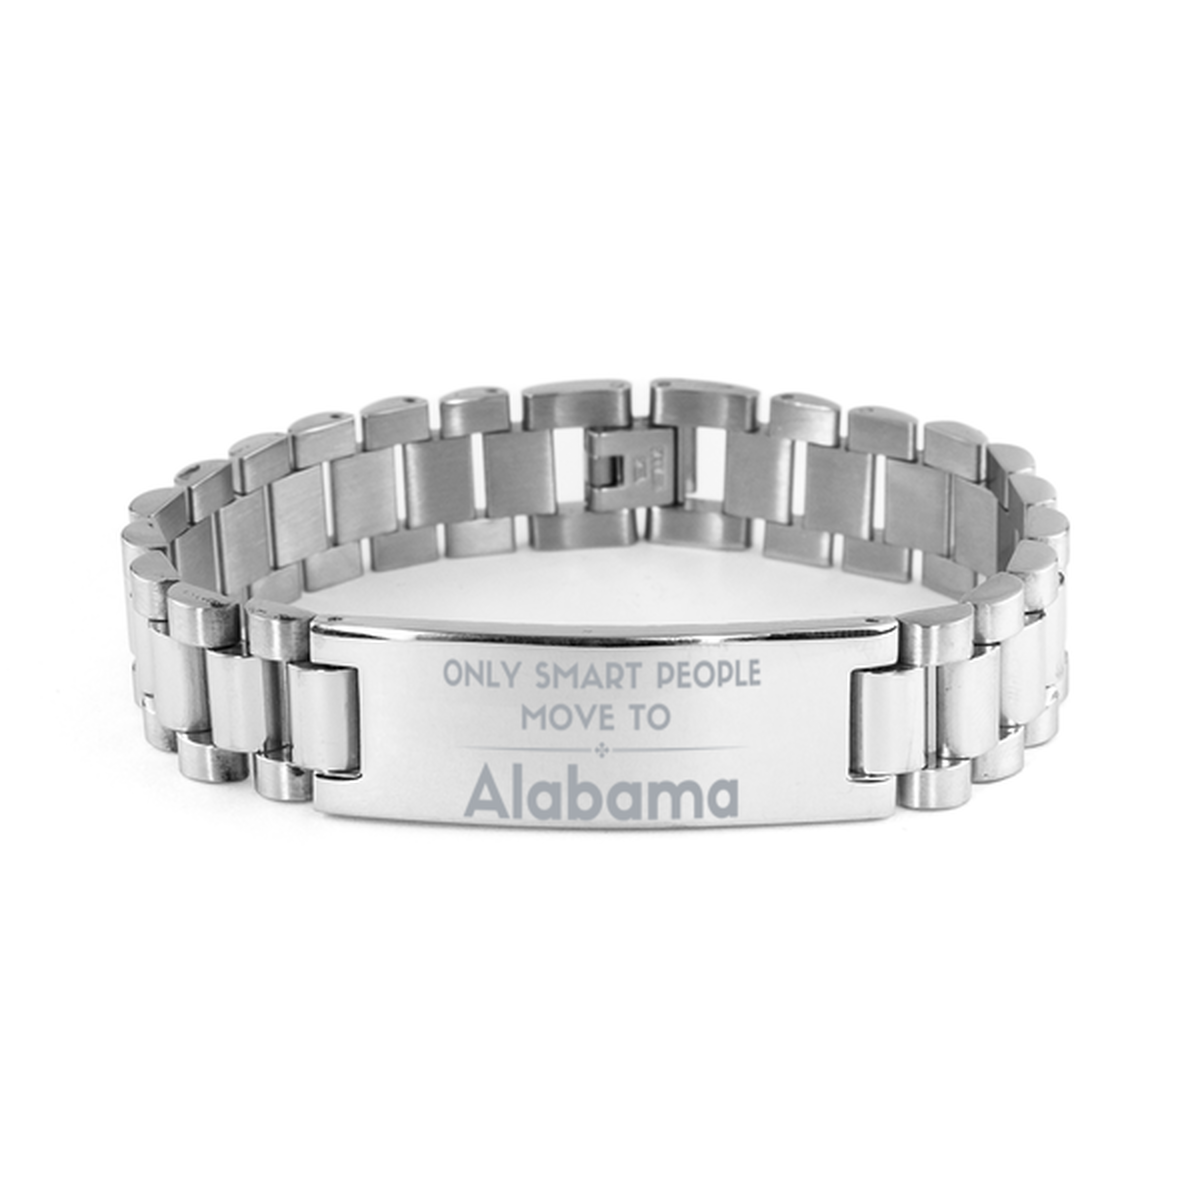 Only smart people move to Alabama Ladder Stainless Steel Bracelet, Gag Gifts For Alabama, Move to Alabama Gifts for Friends Coworker Funny Saying Quote